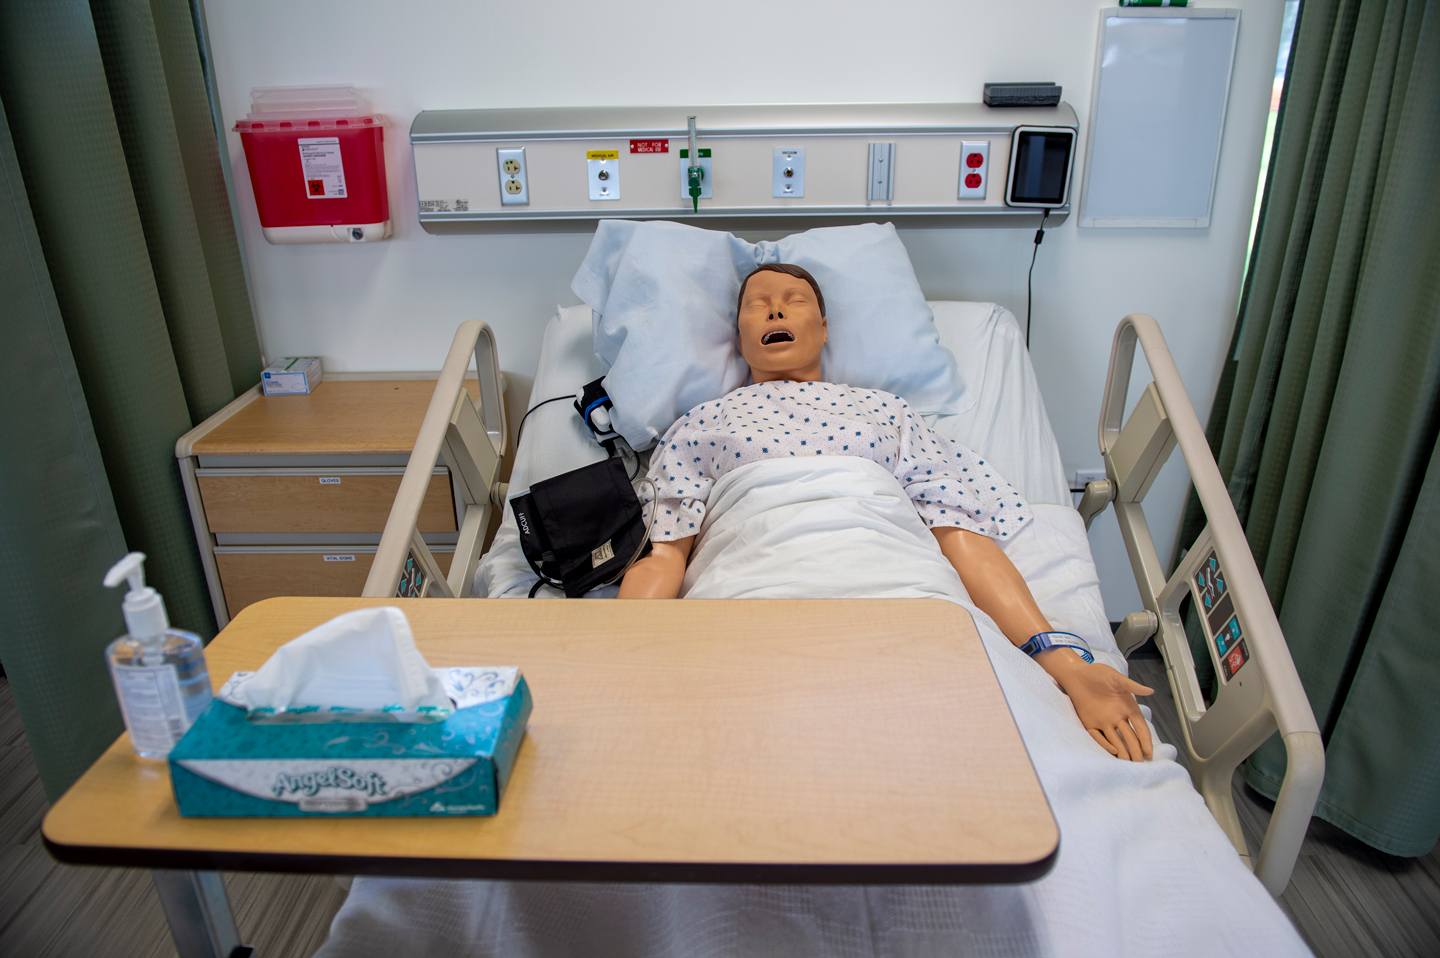 Adult manikin in a hospital bed in the simulation lab.